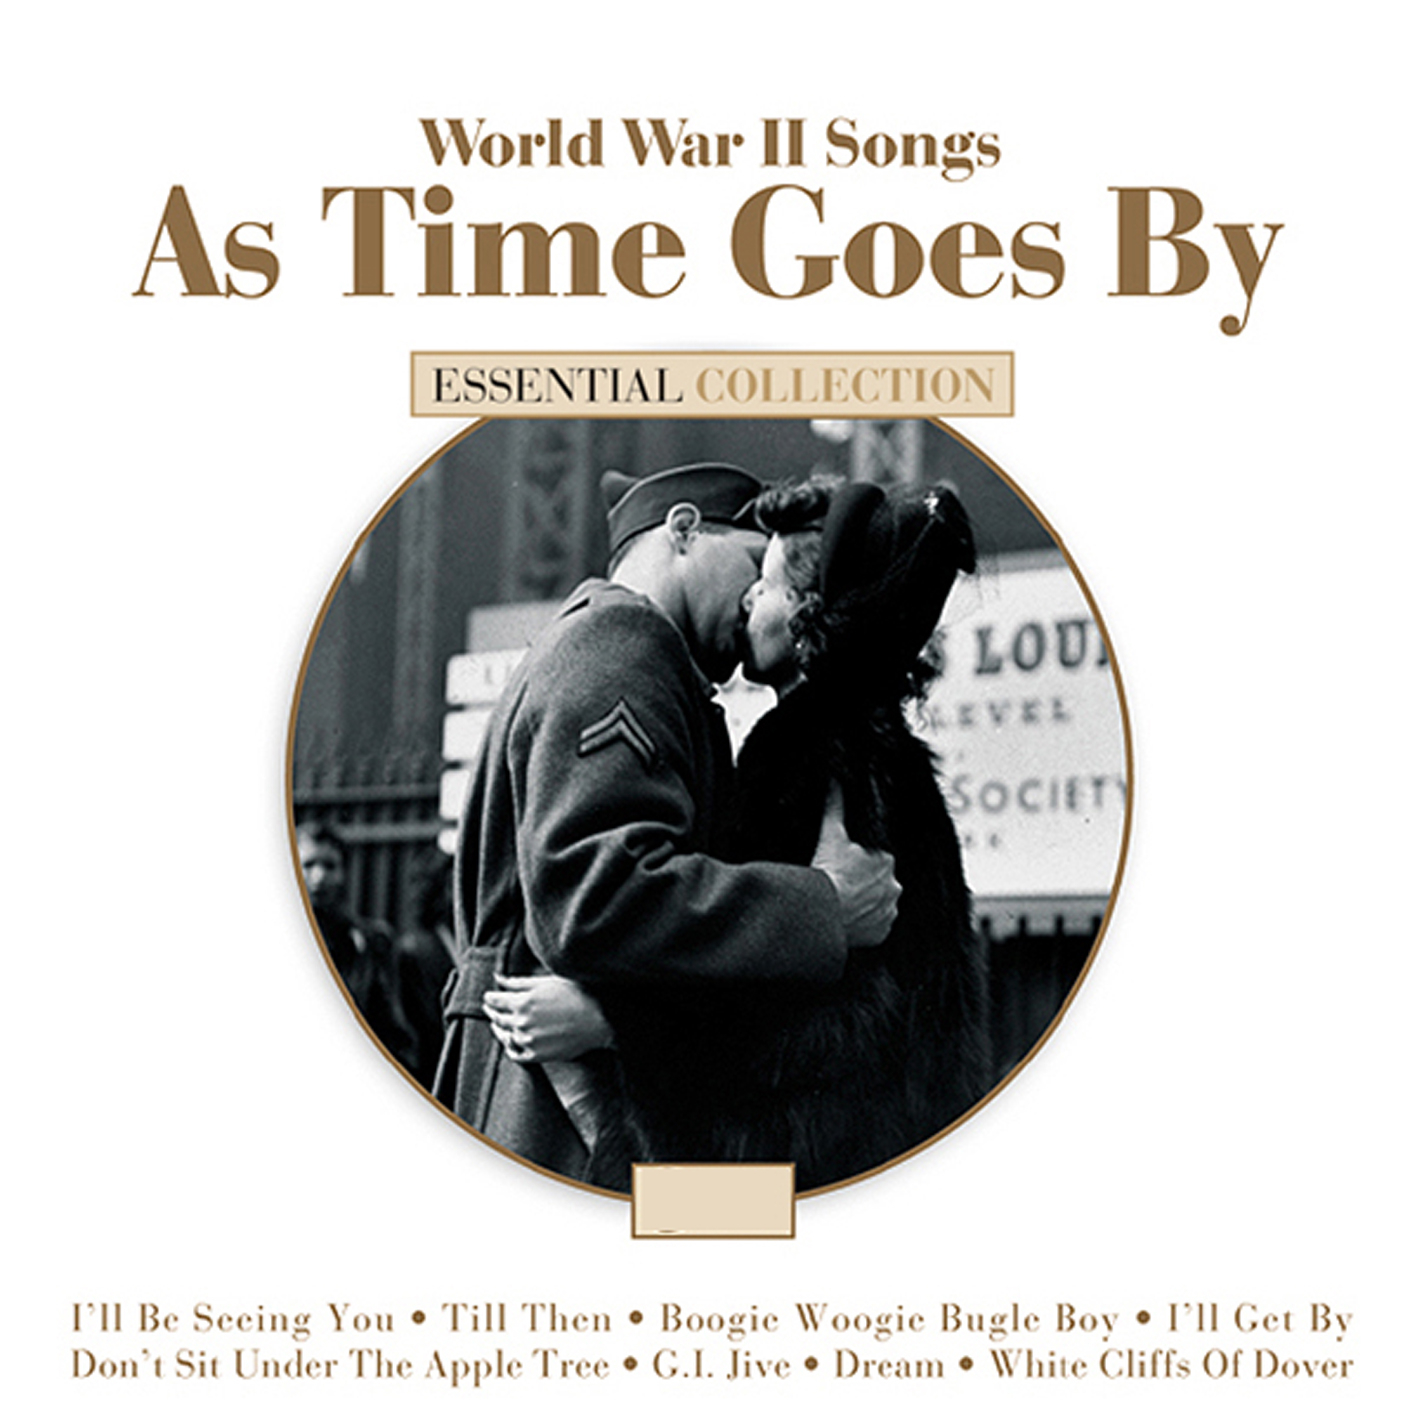 WWII Songs